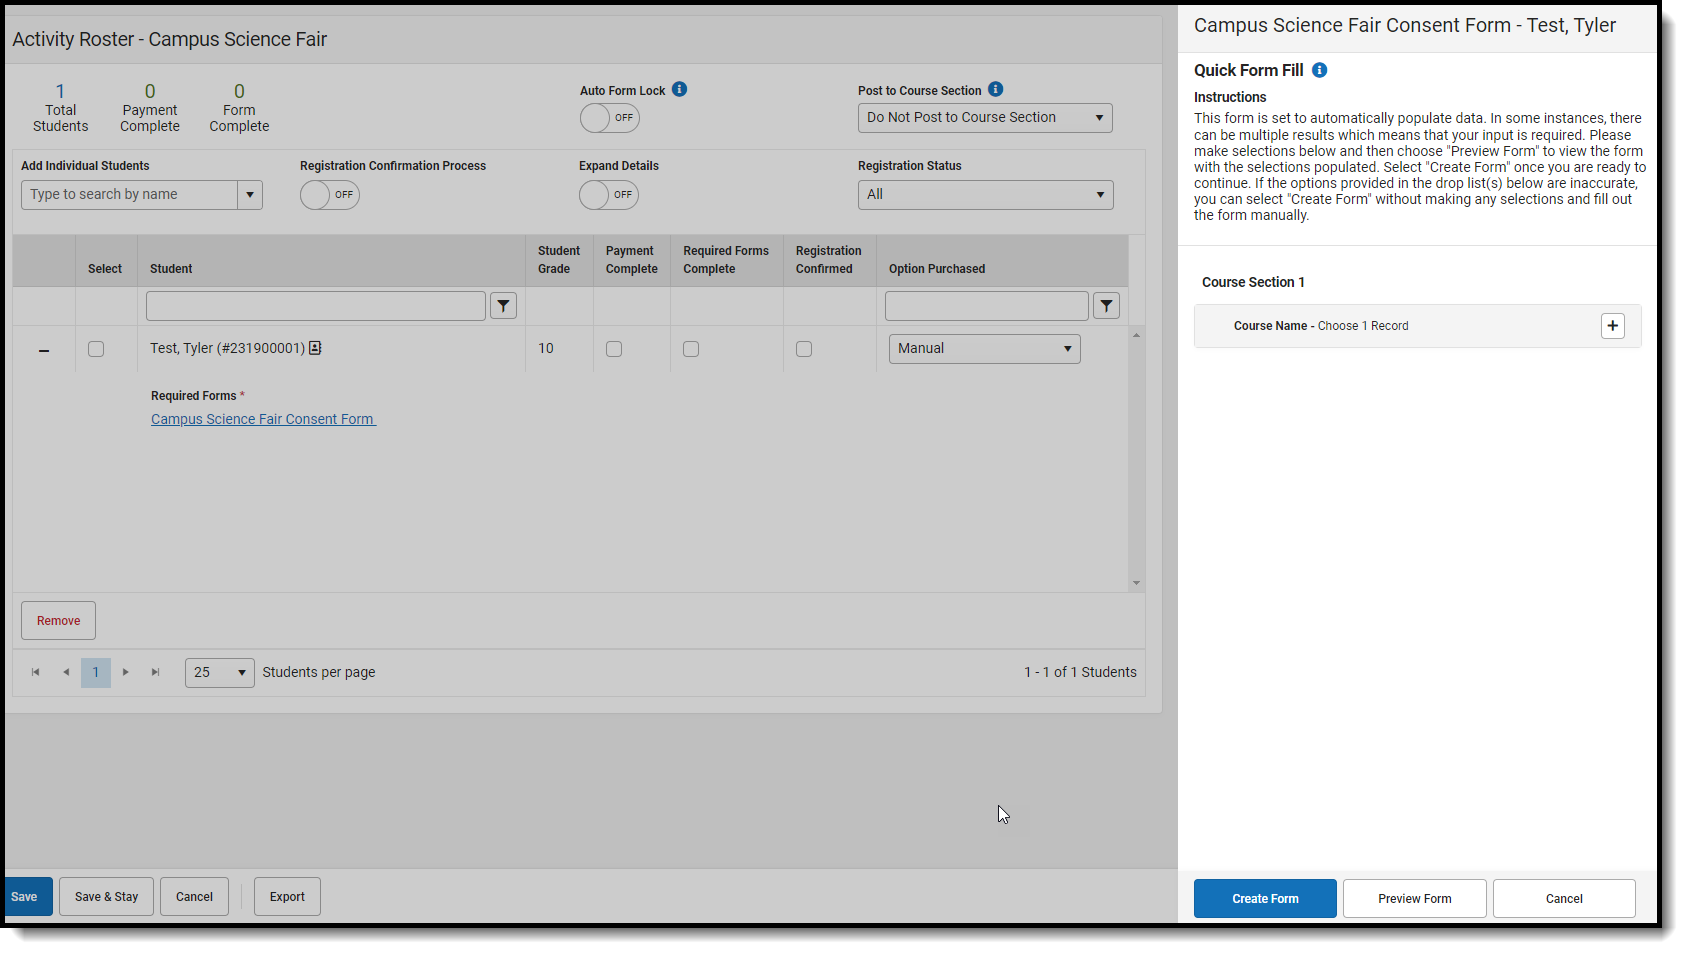 Screenshot of the Quick Form Fill panel.